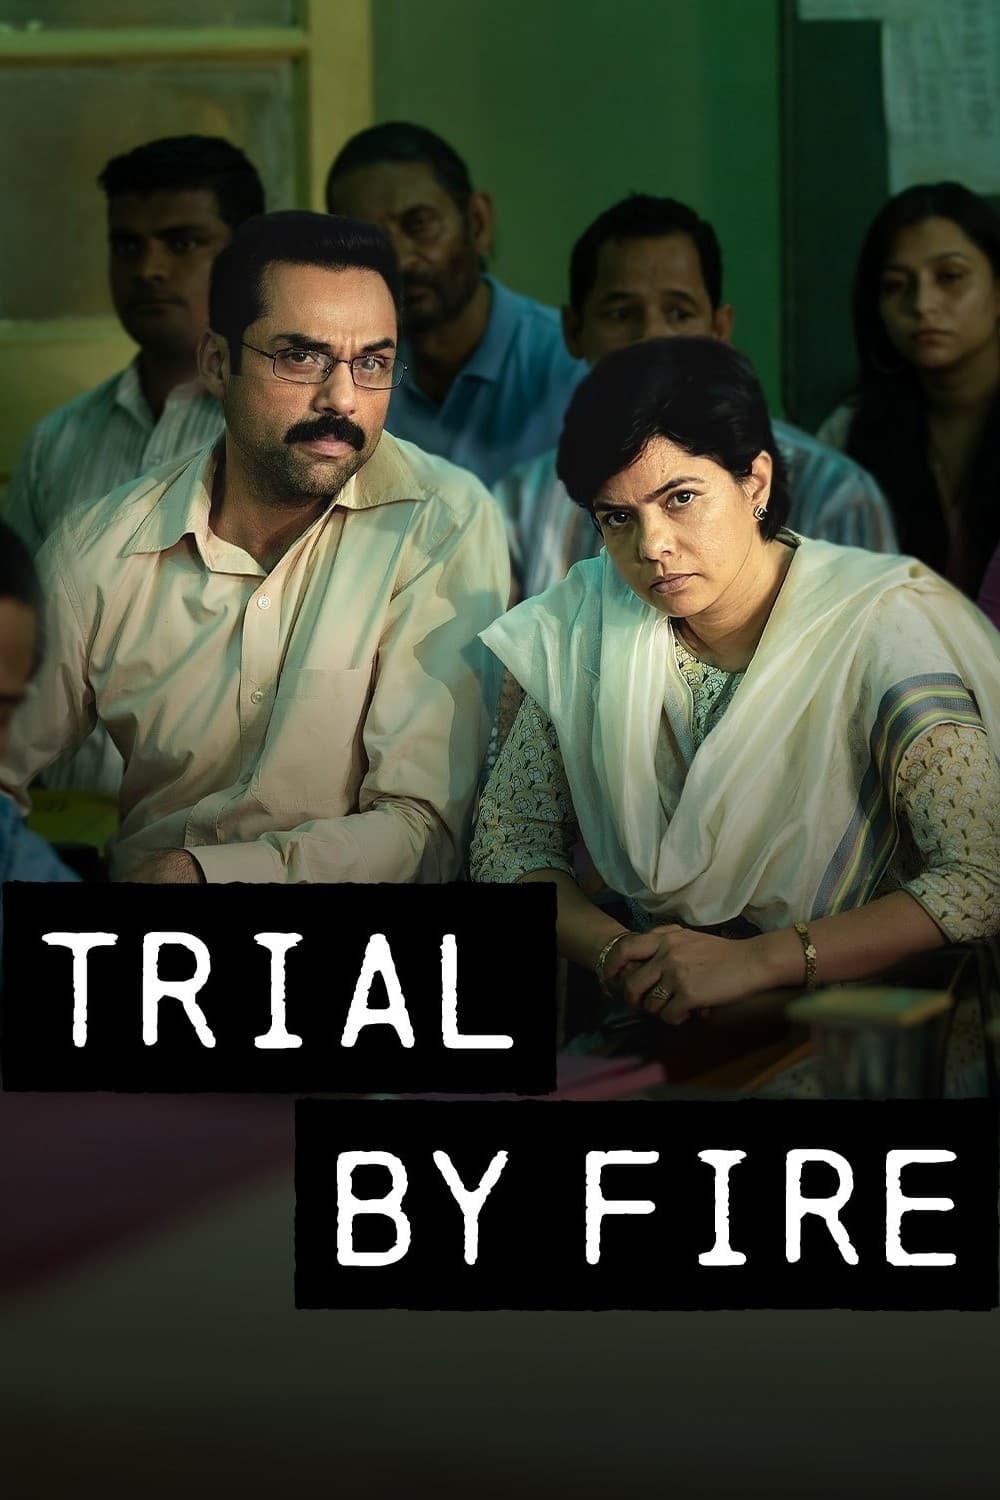 Trial By Fire (Season 1) Hindi WEB-DL 1080p 720p & 480p x264 DD5.1 | [All Episodes!] NF Series